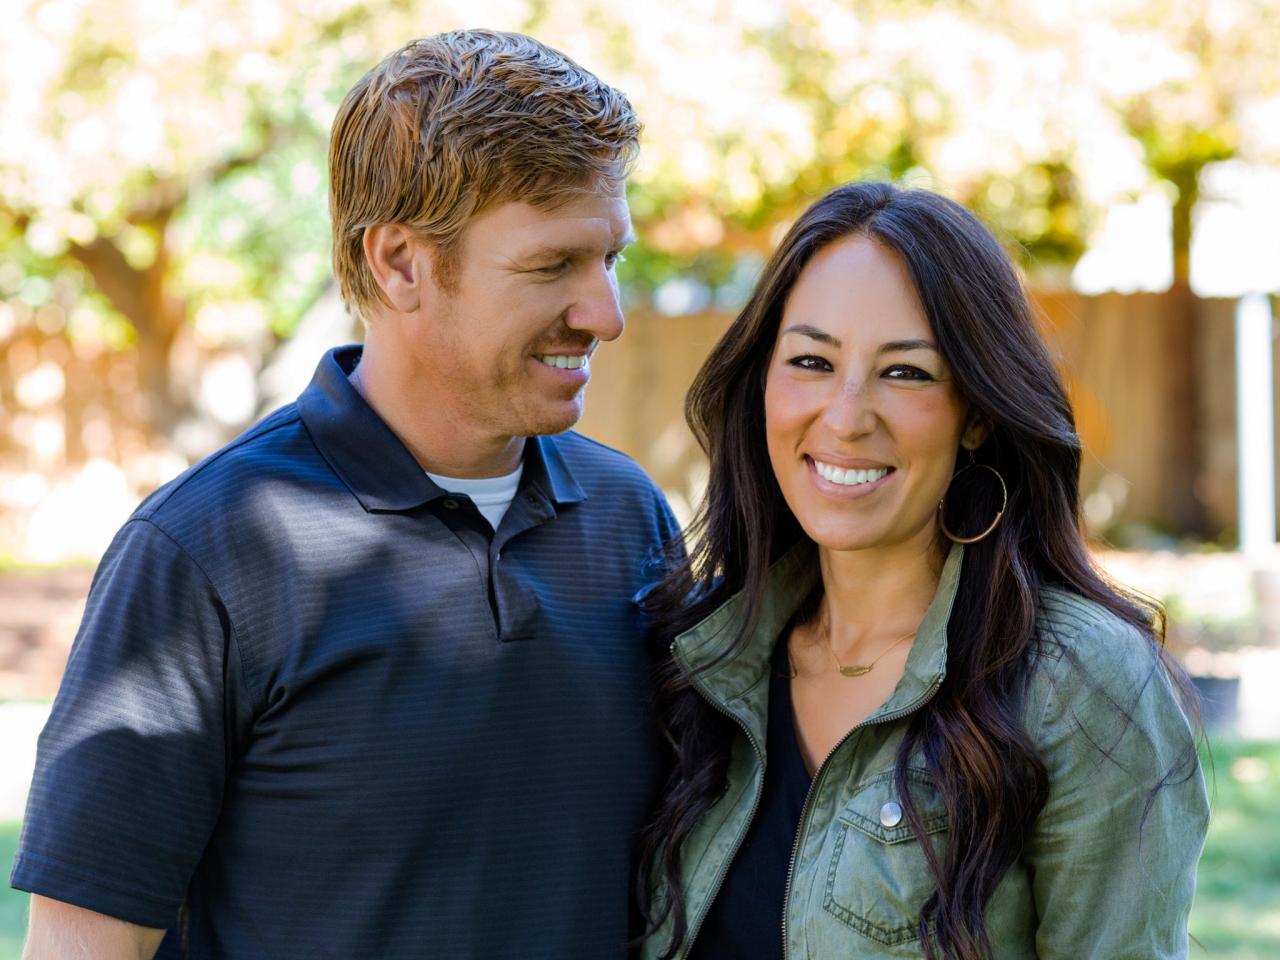 Know About Chip and Joanna Gaines' Relationship